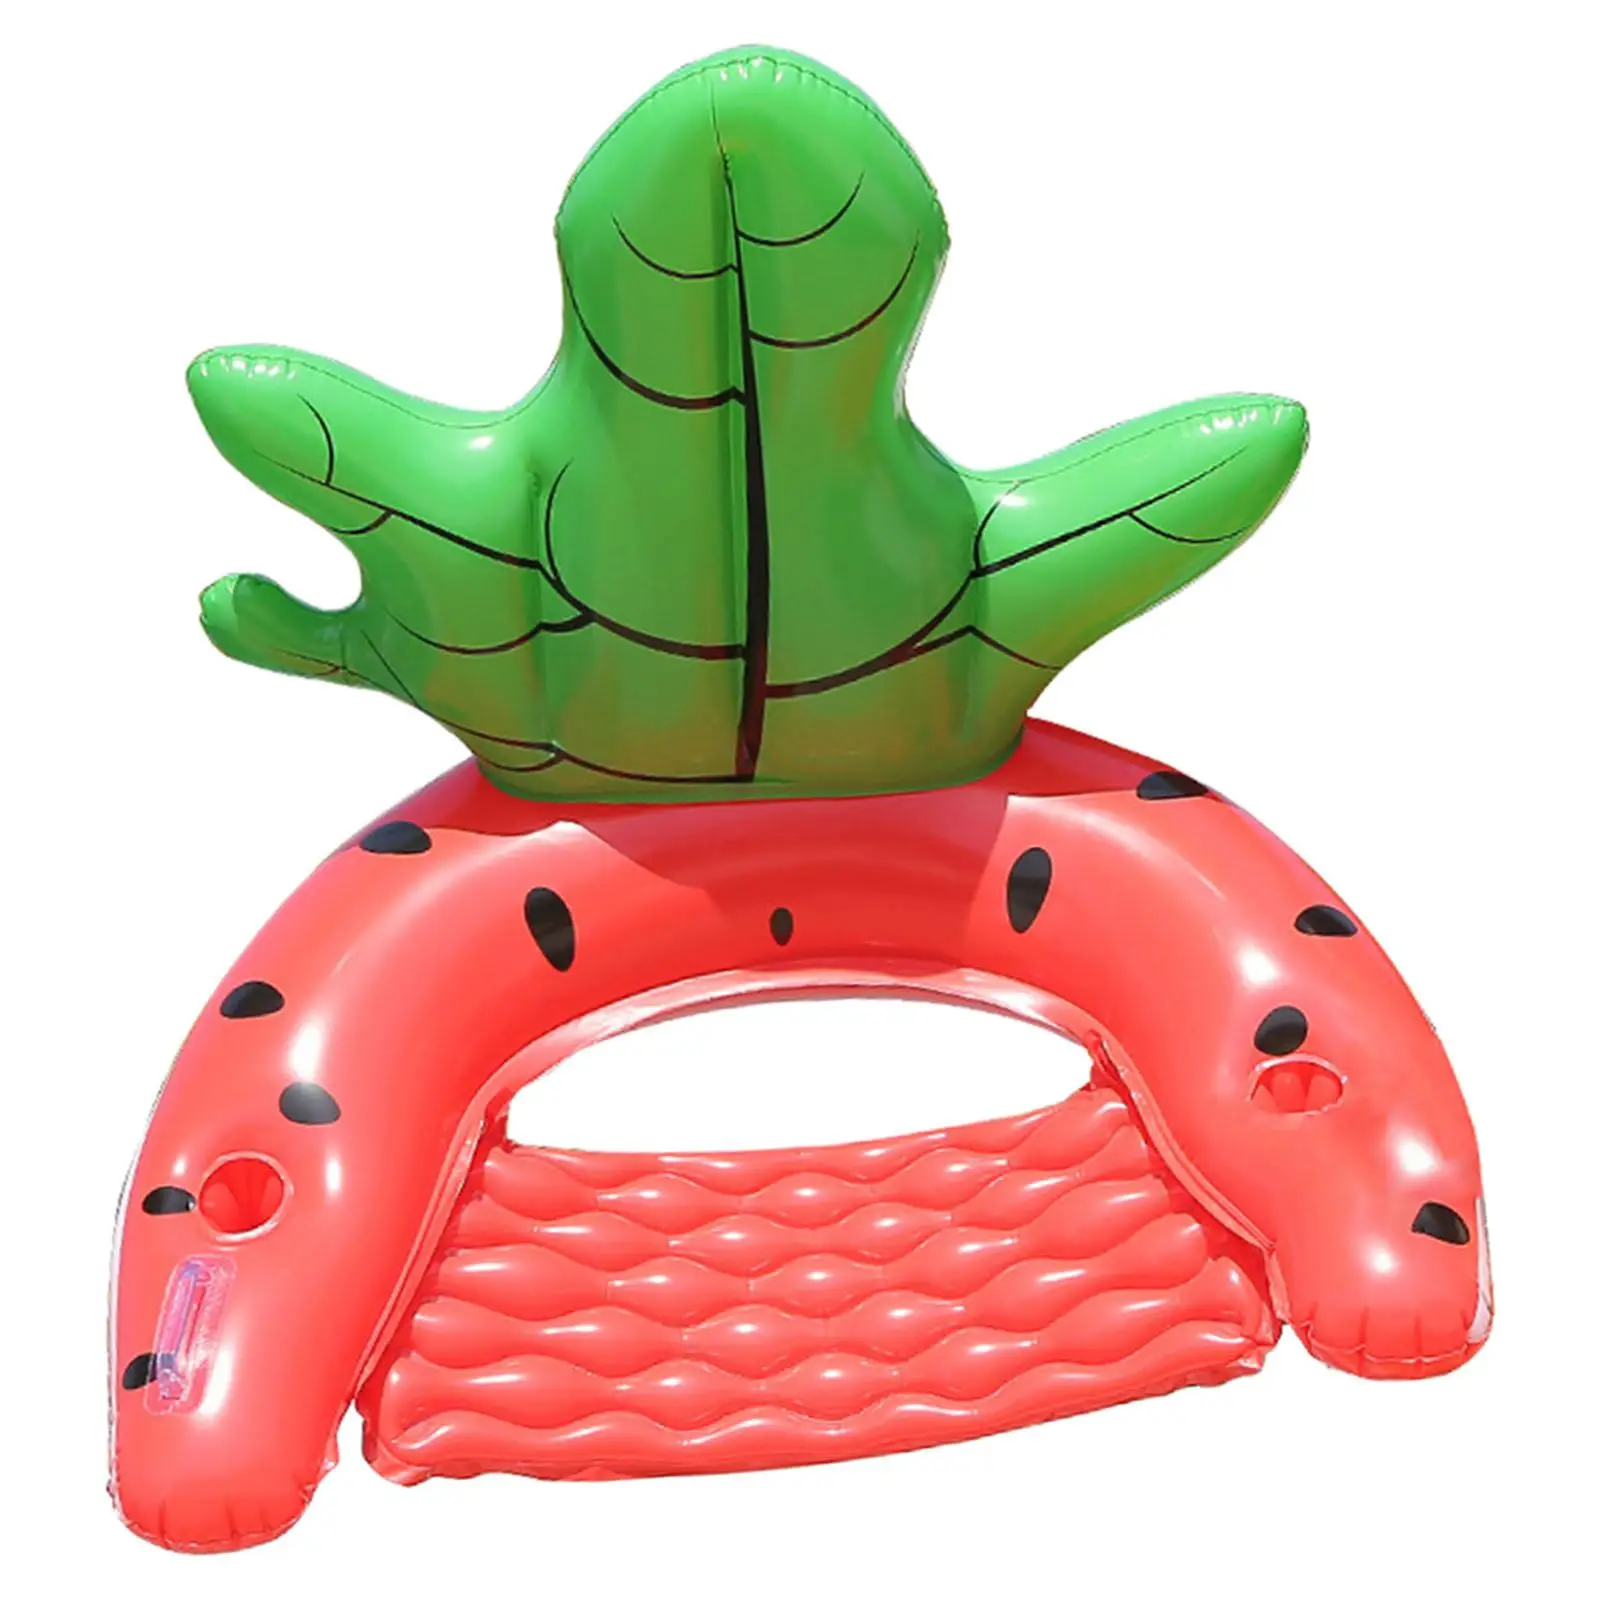 Watermelon Inflatable Pool Float with Handles Beach Float Chair Lake Raft for Swimming Pool Beach Outdoor Party